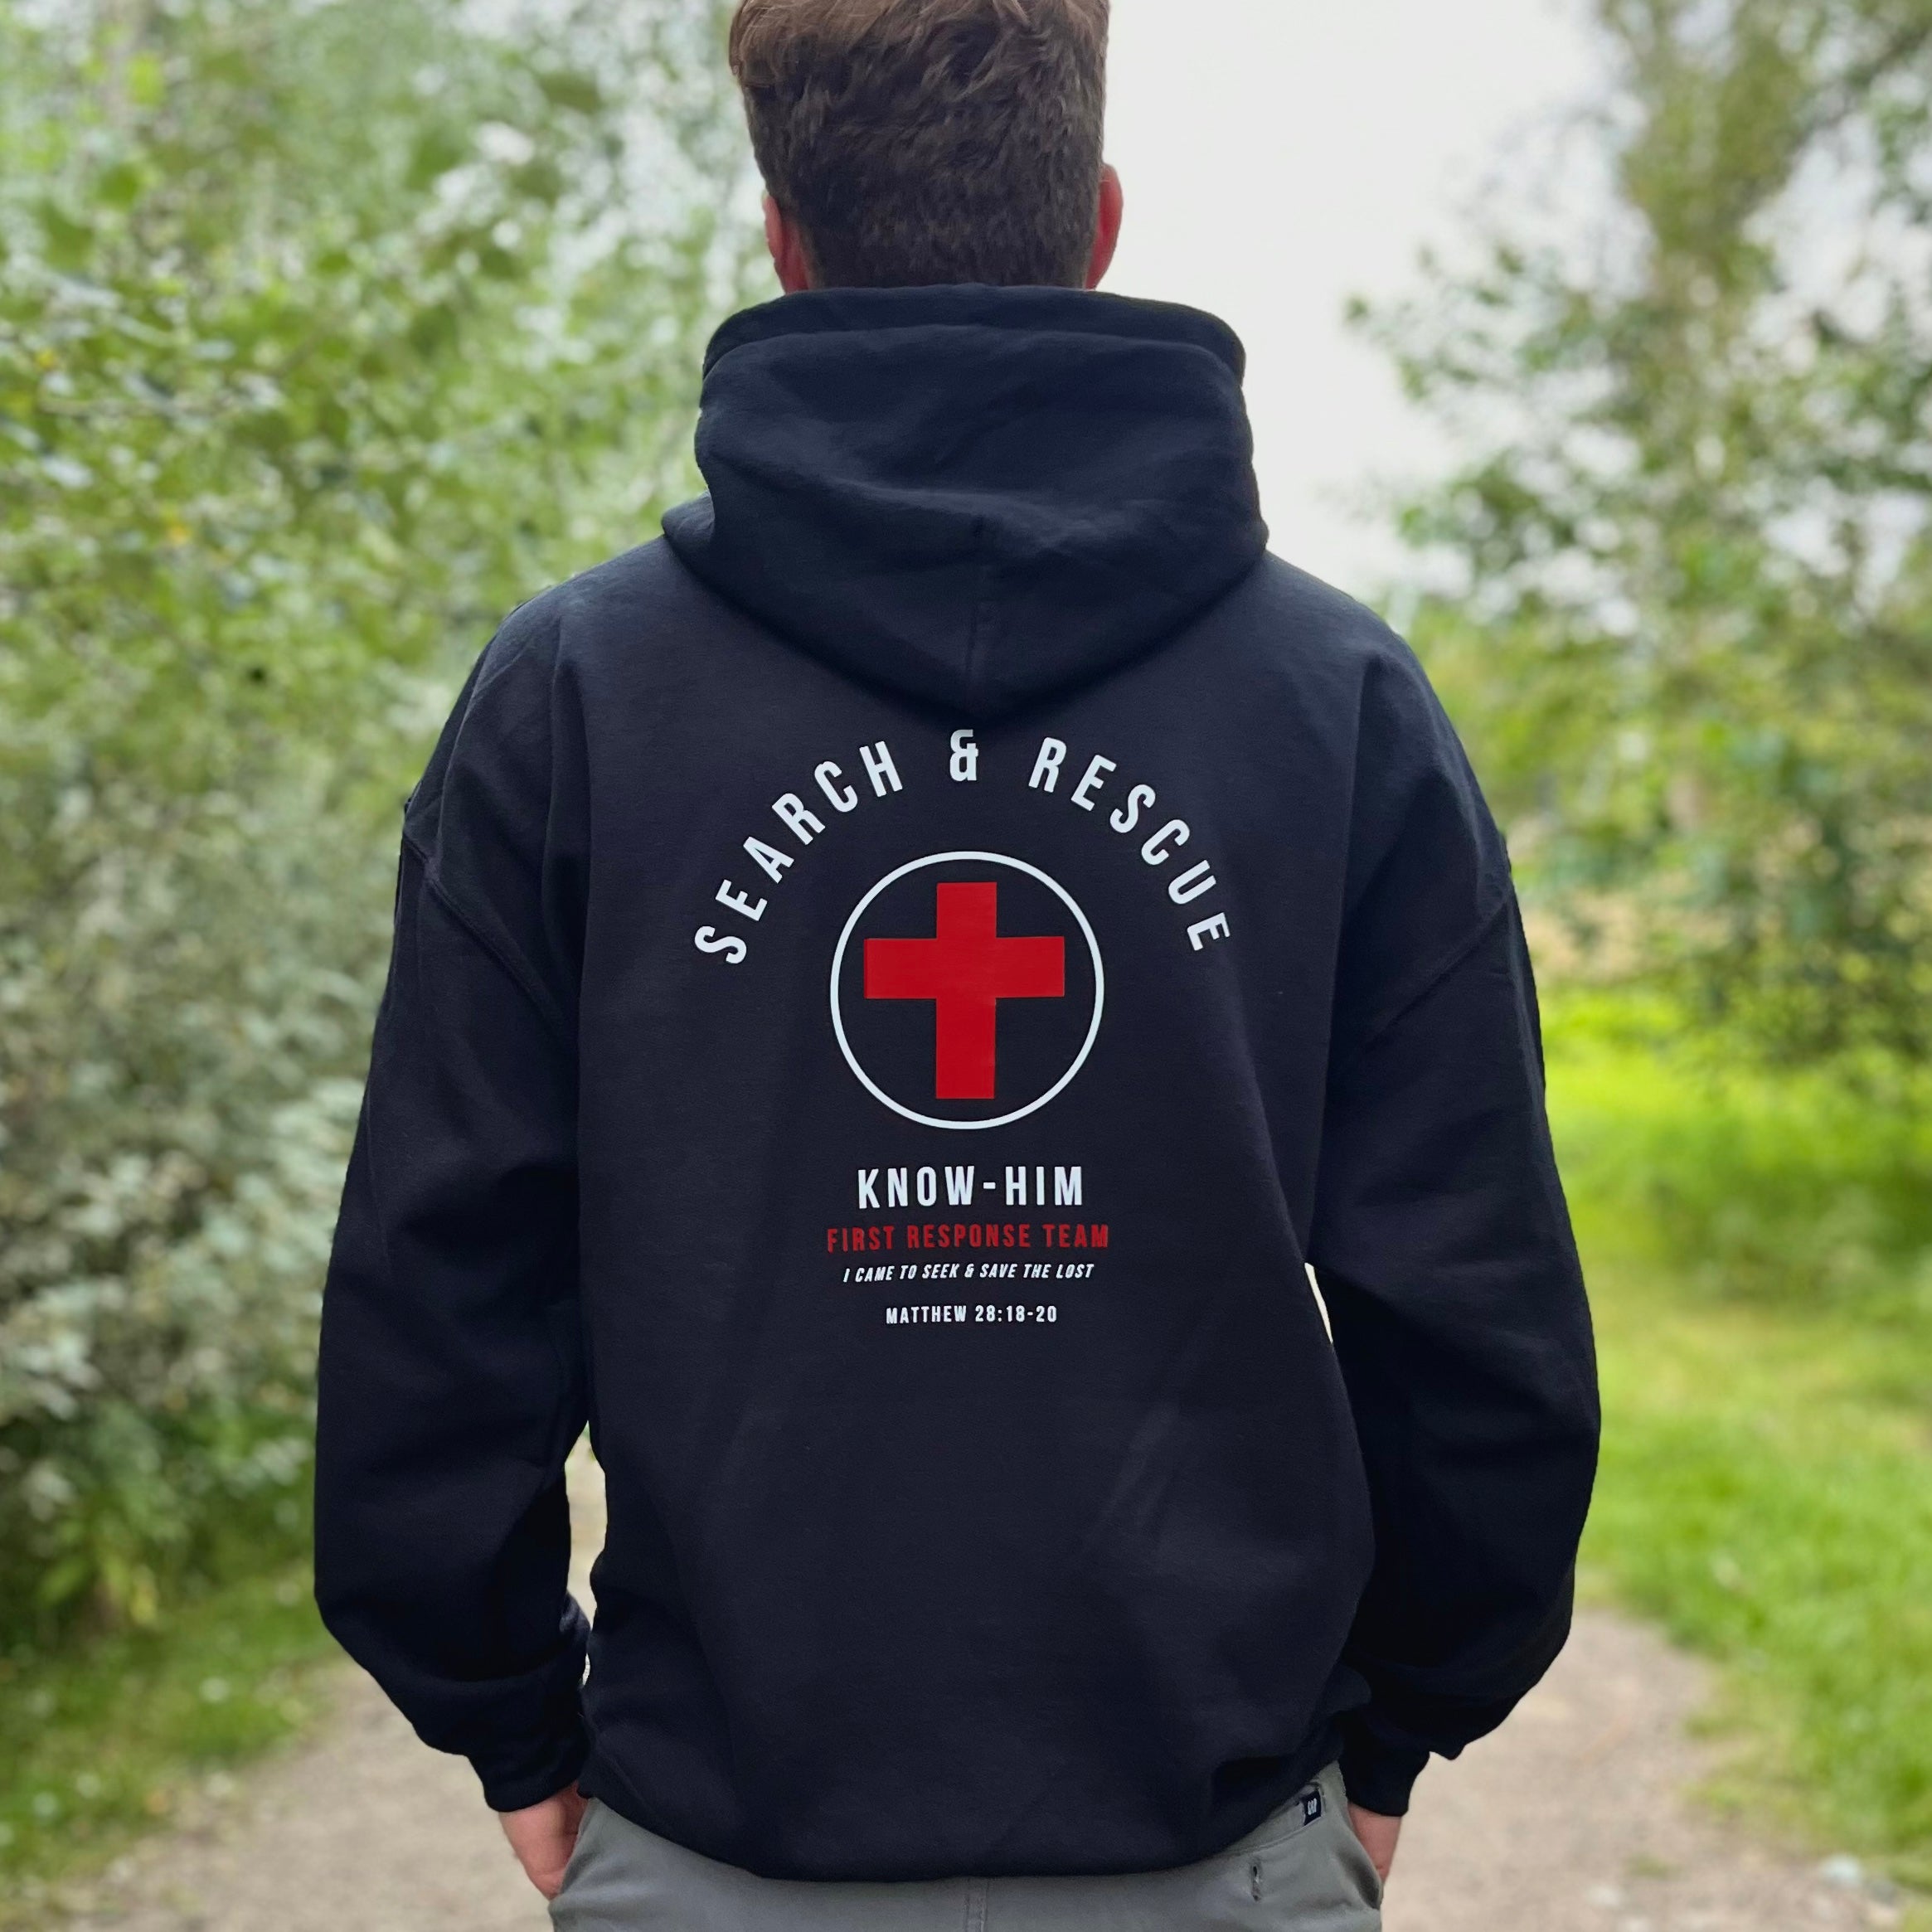 Search and Rescue (Black) - Hoodie